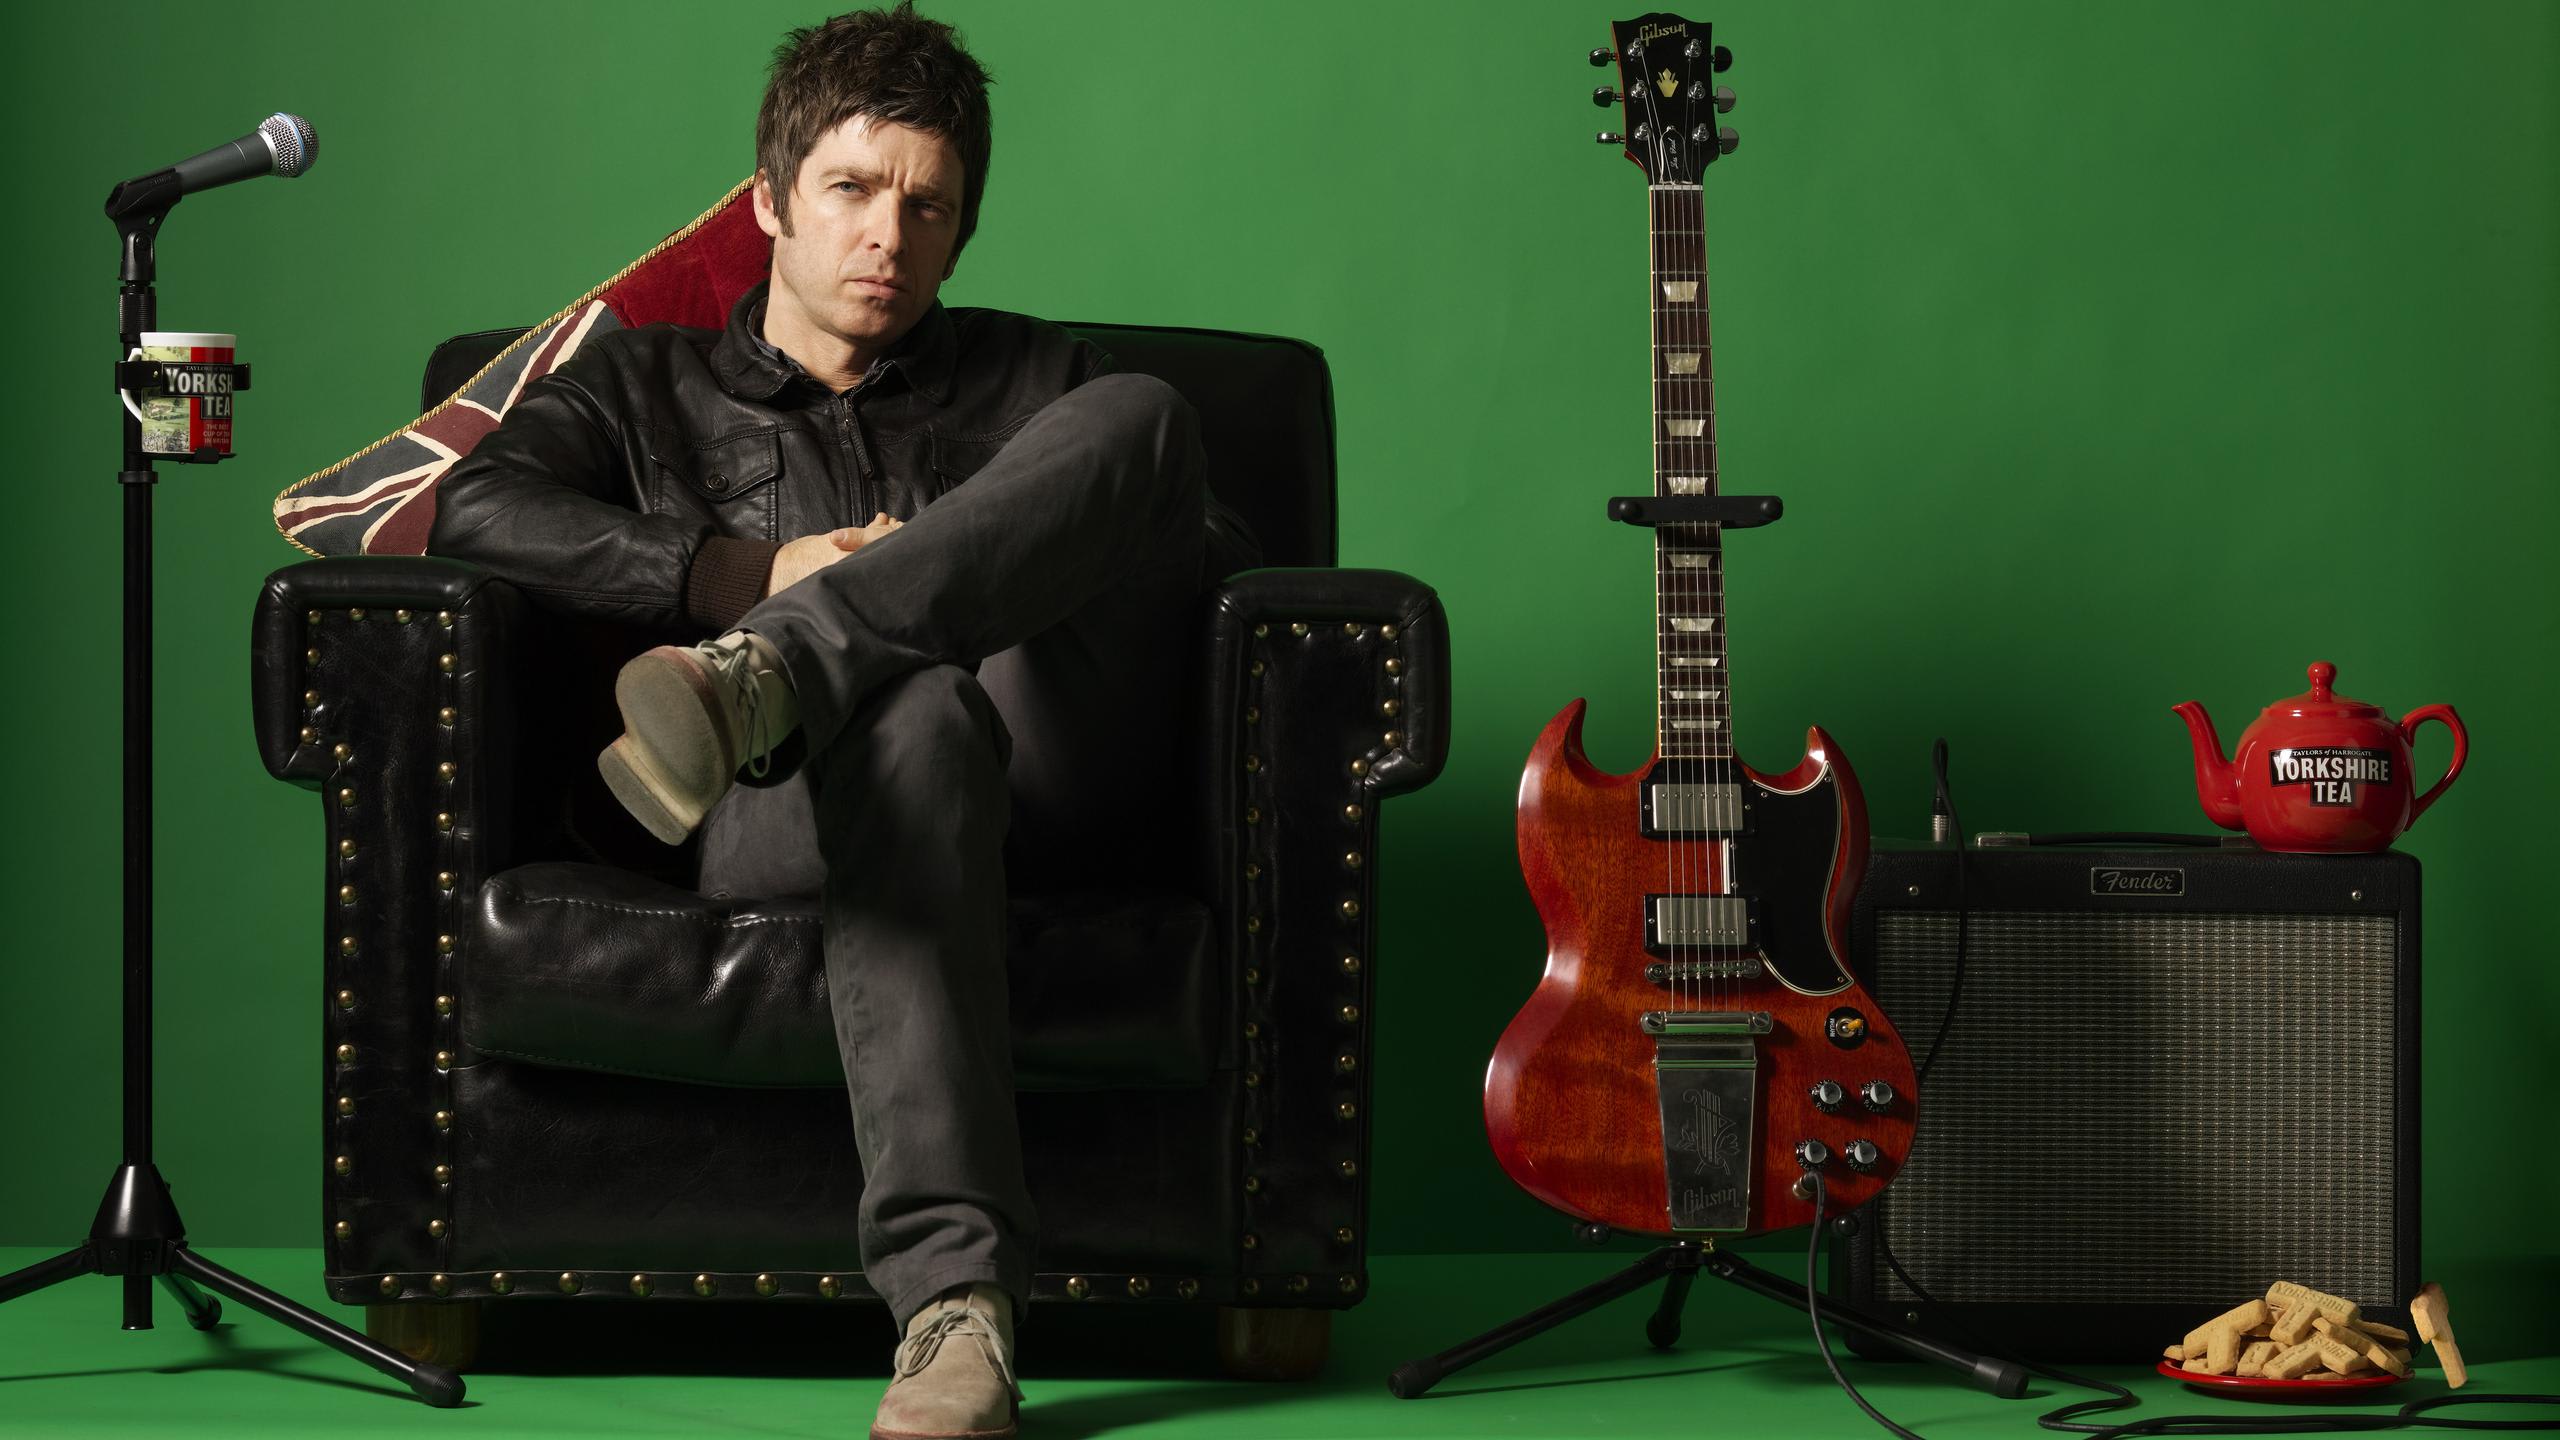 Noel Gallagher sits on a chair beside his guitar